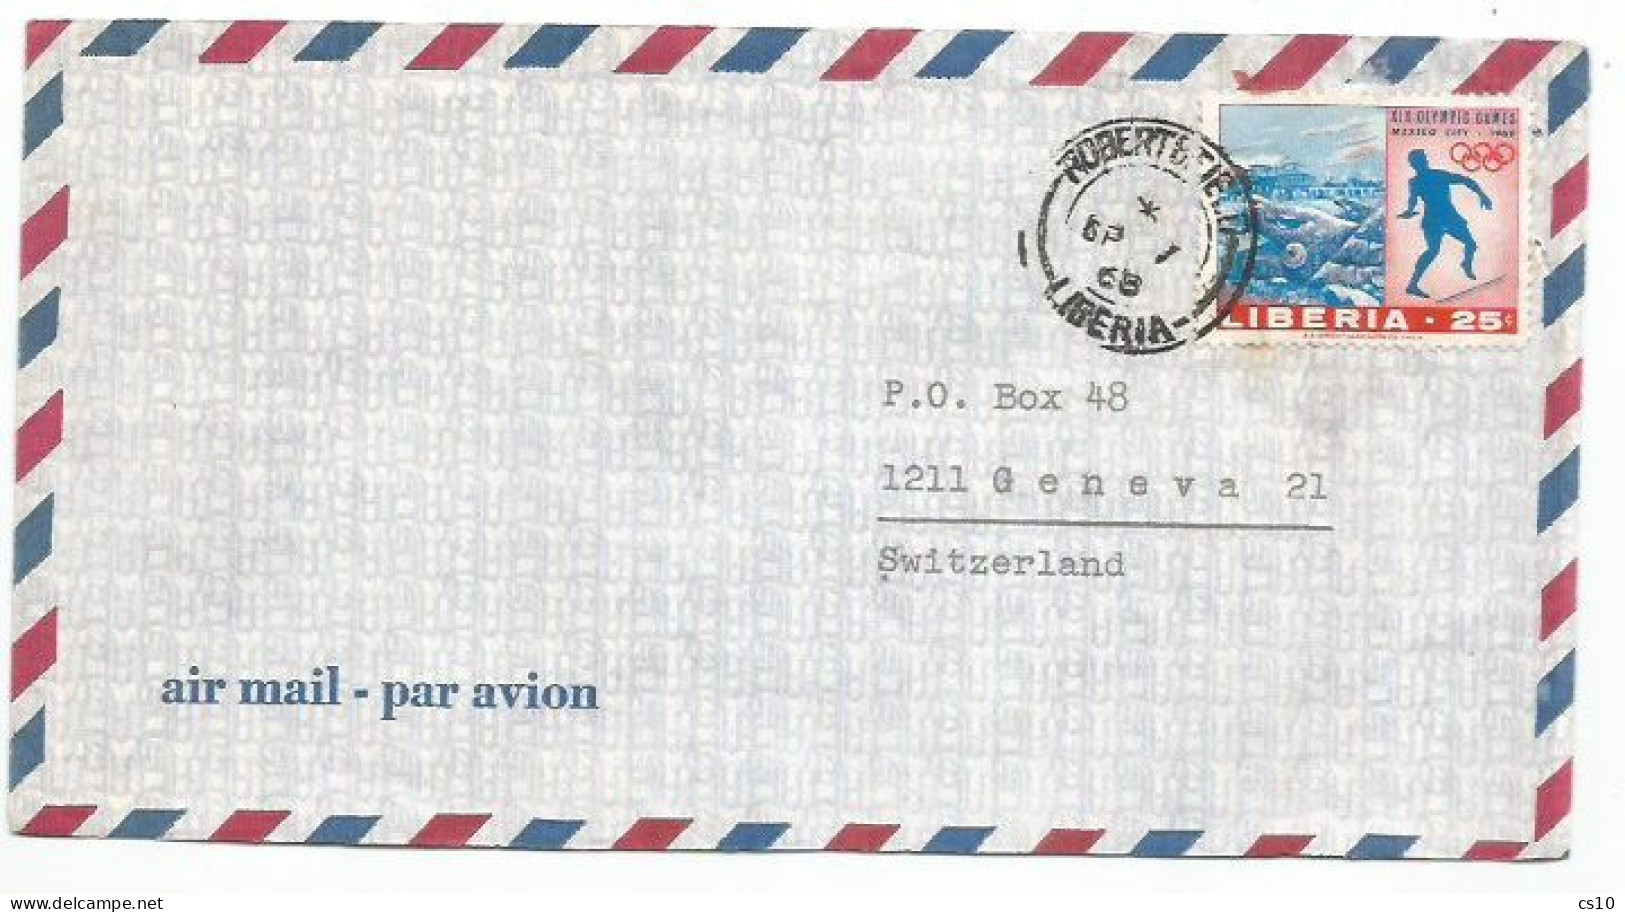 Liberia Airmail Cover Robertsfield 7sep1968 X Suisse With Olympic Games Mexico 1968 C.25 Discus Throw Solo Franking - Leichtathletik